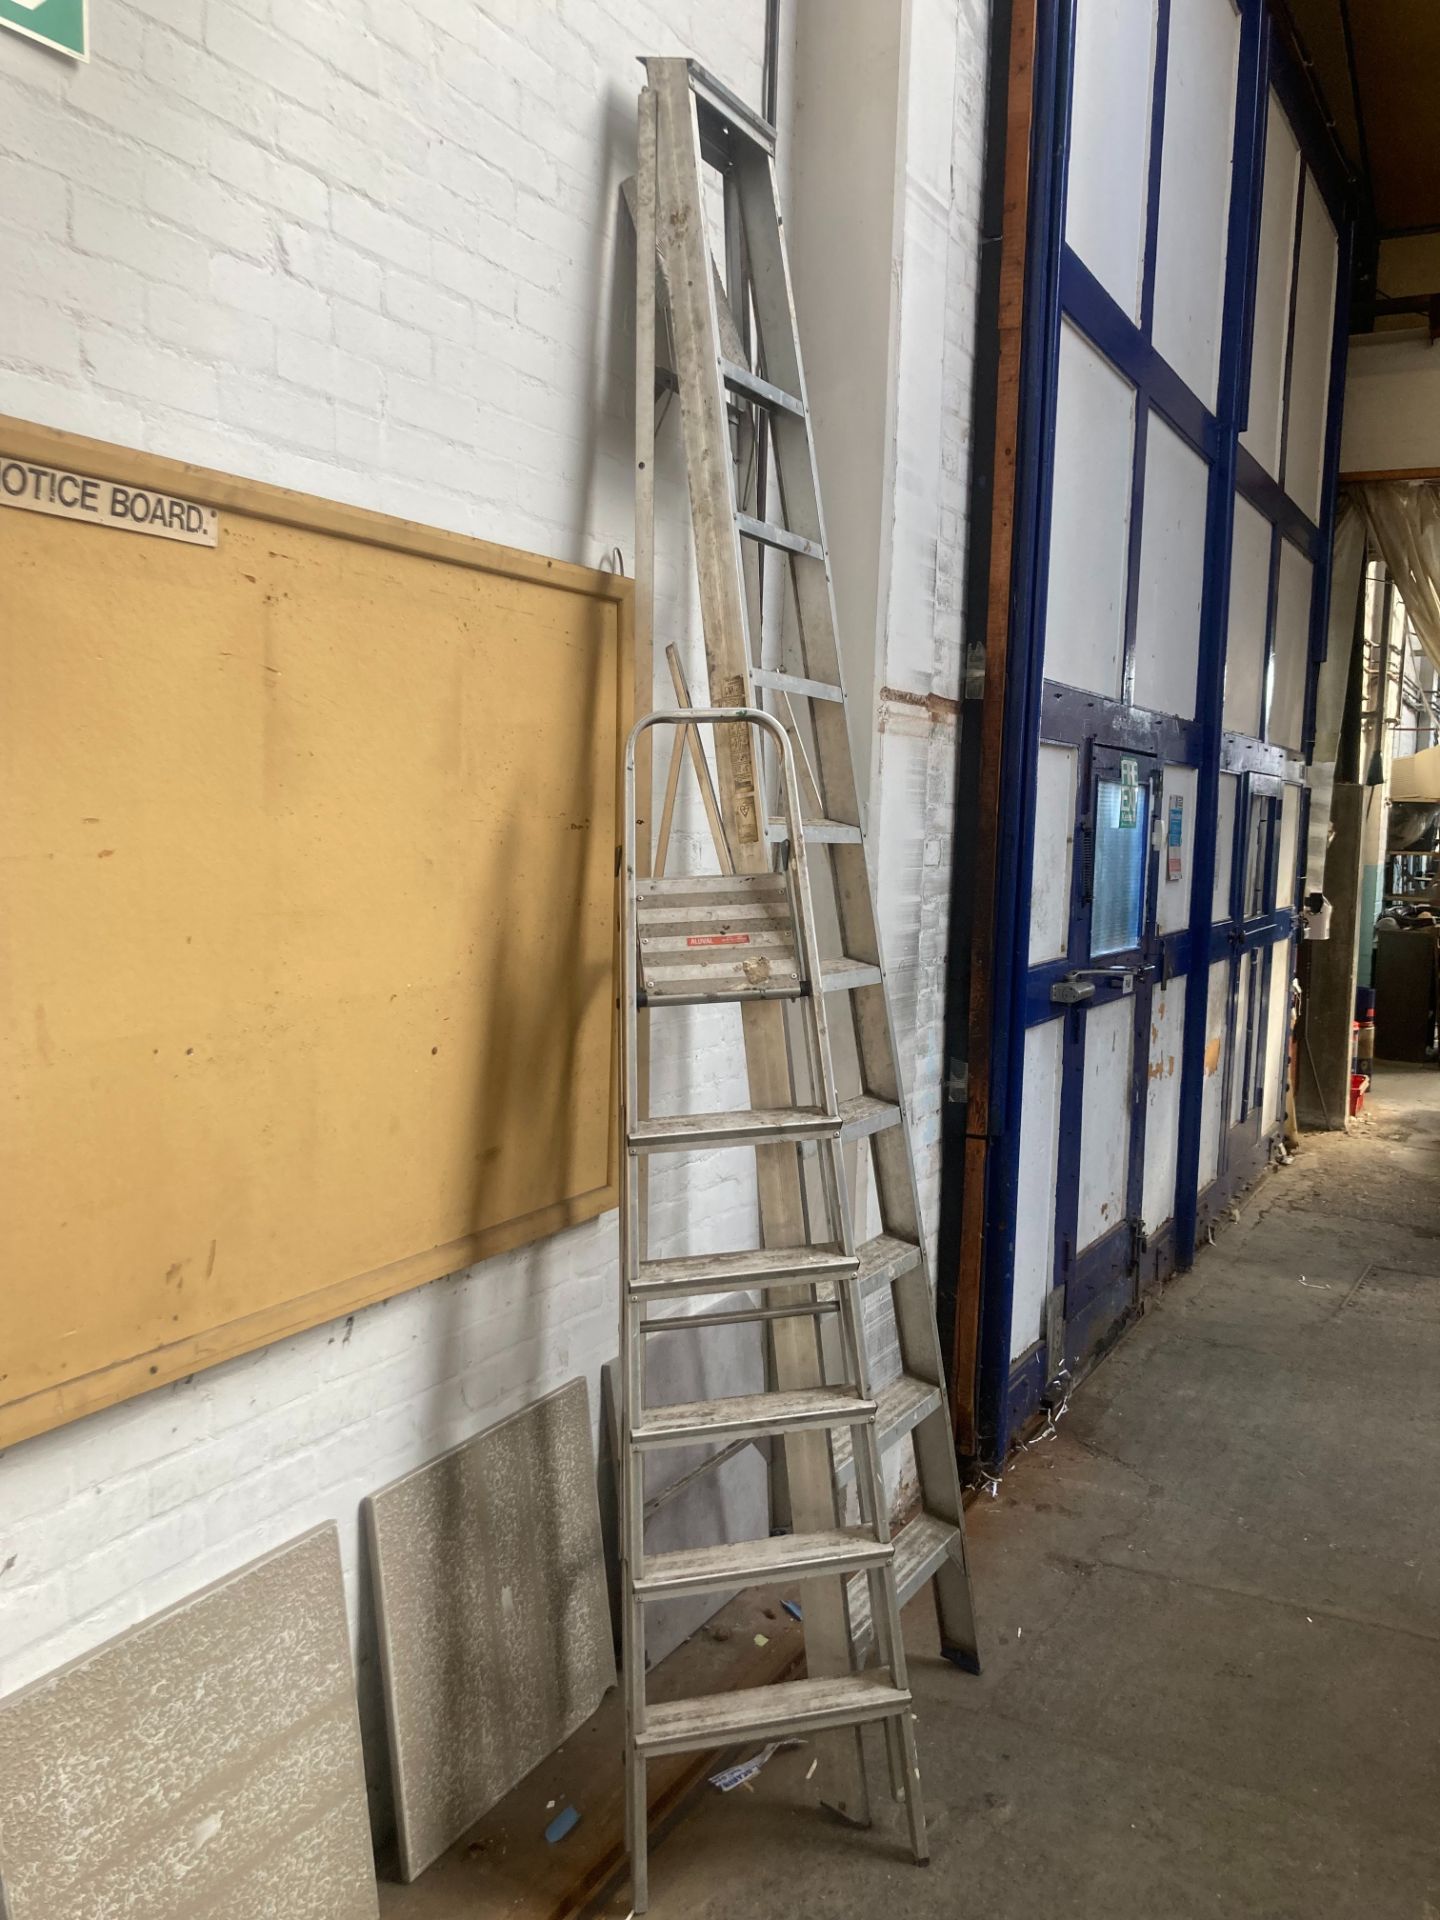 Step ladders - Image 2 of 2